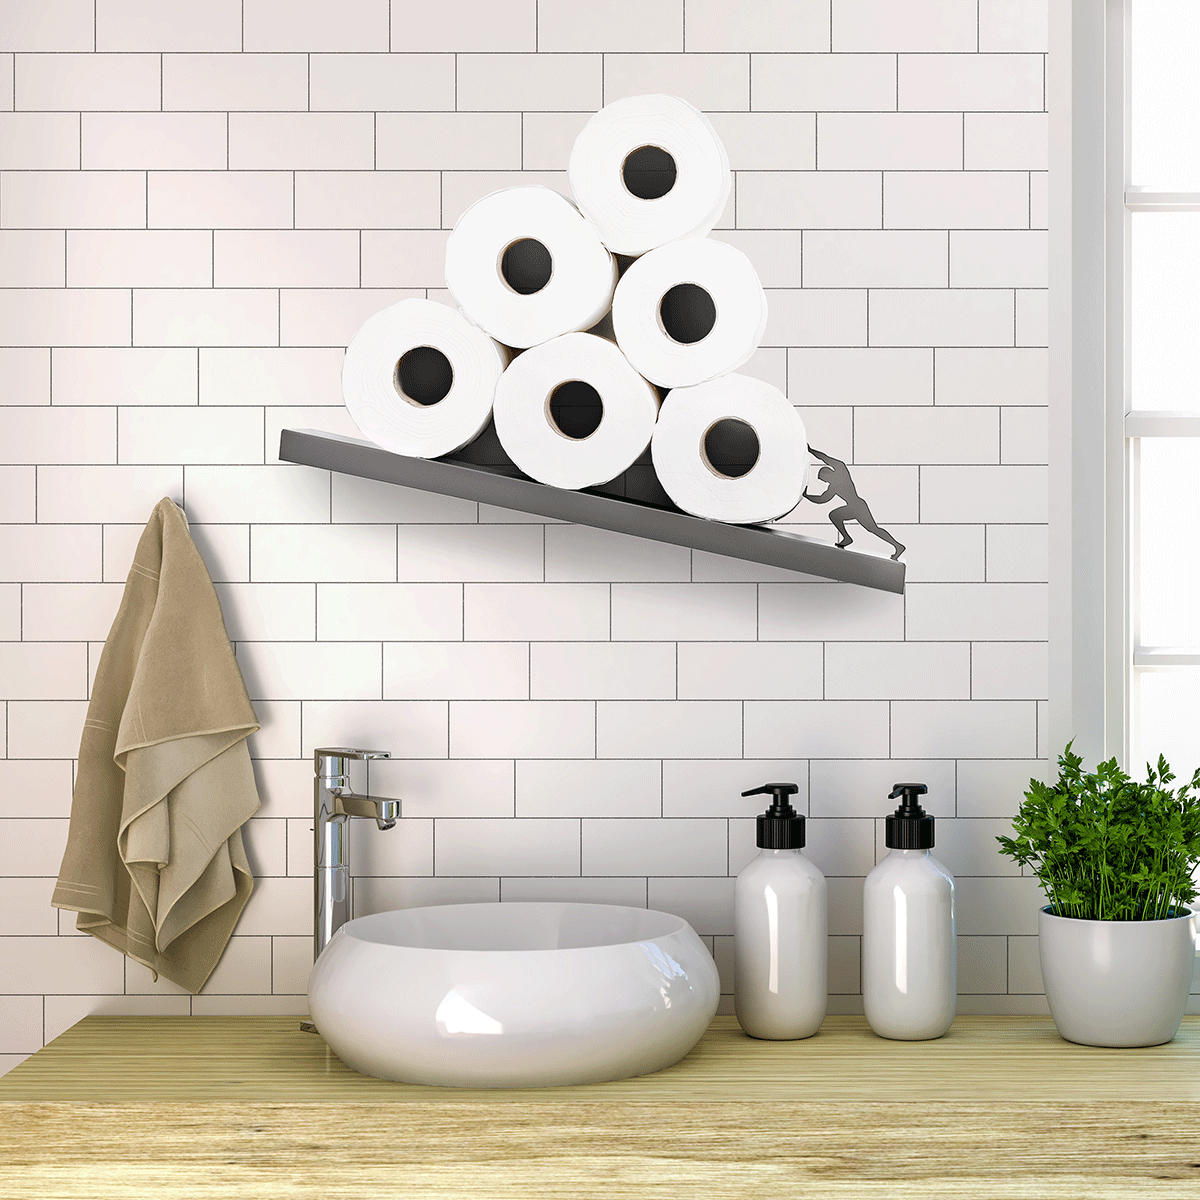 This Toilet Paper Shelf I Designed Is Hard At Work All The Time